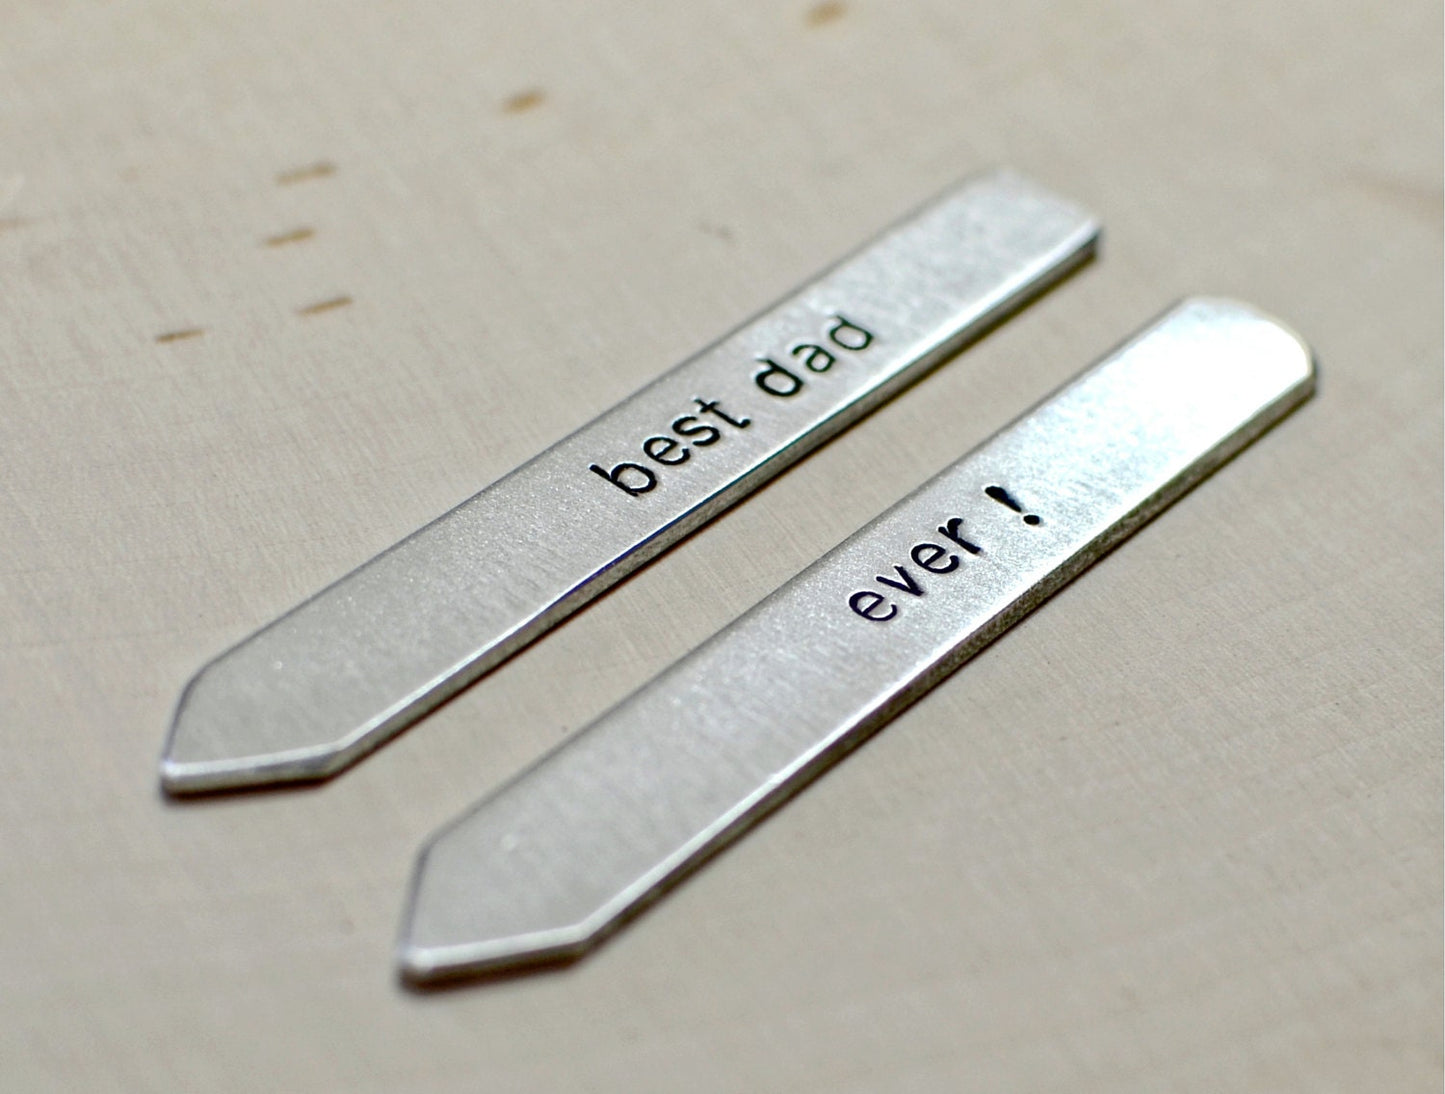 Collar stays for dad in your choice of silver or aluminum